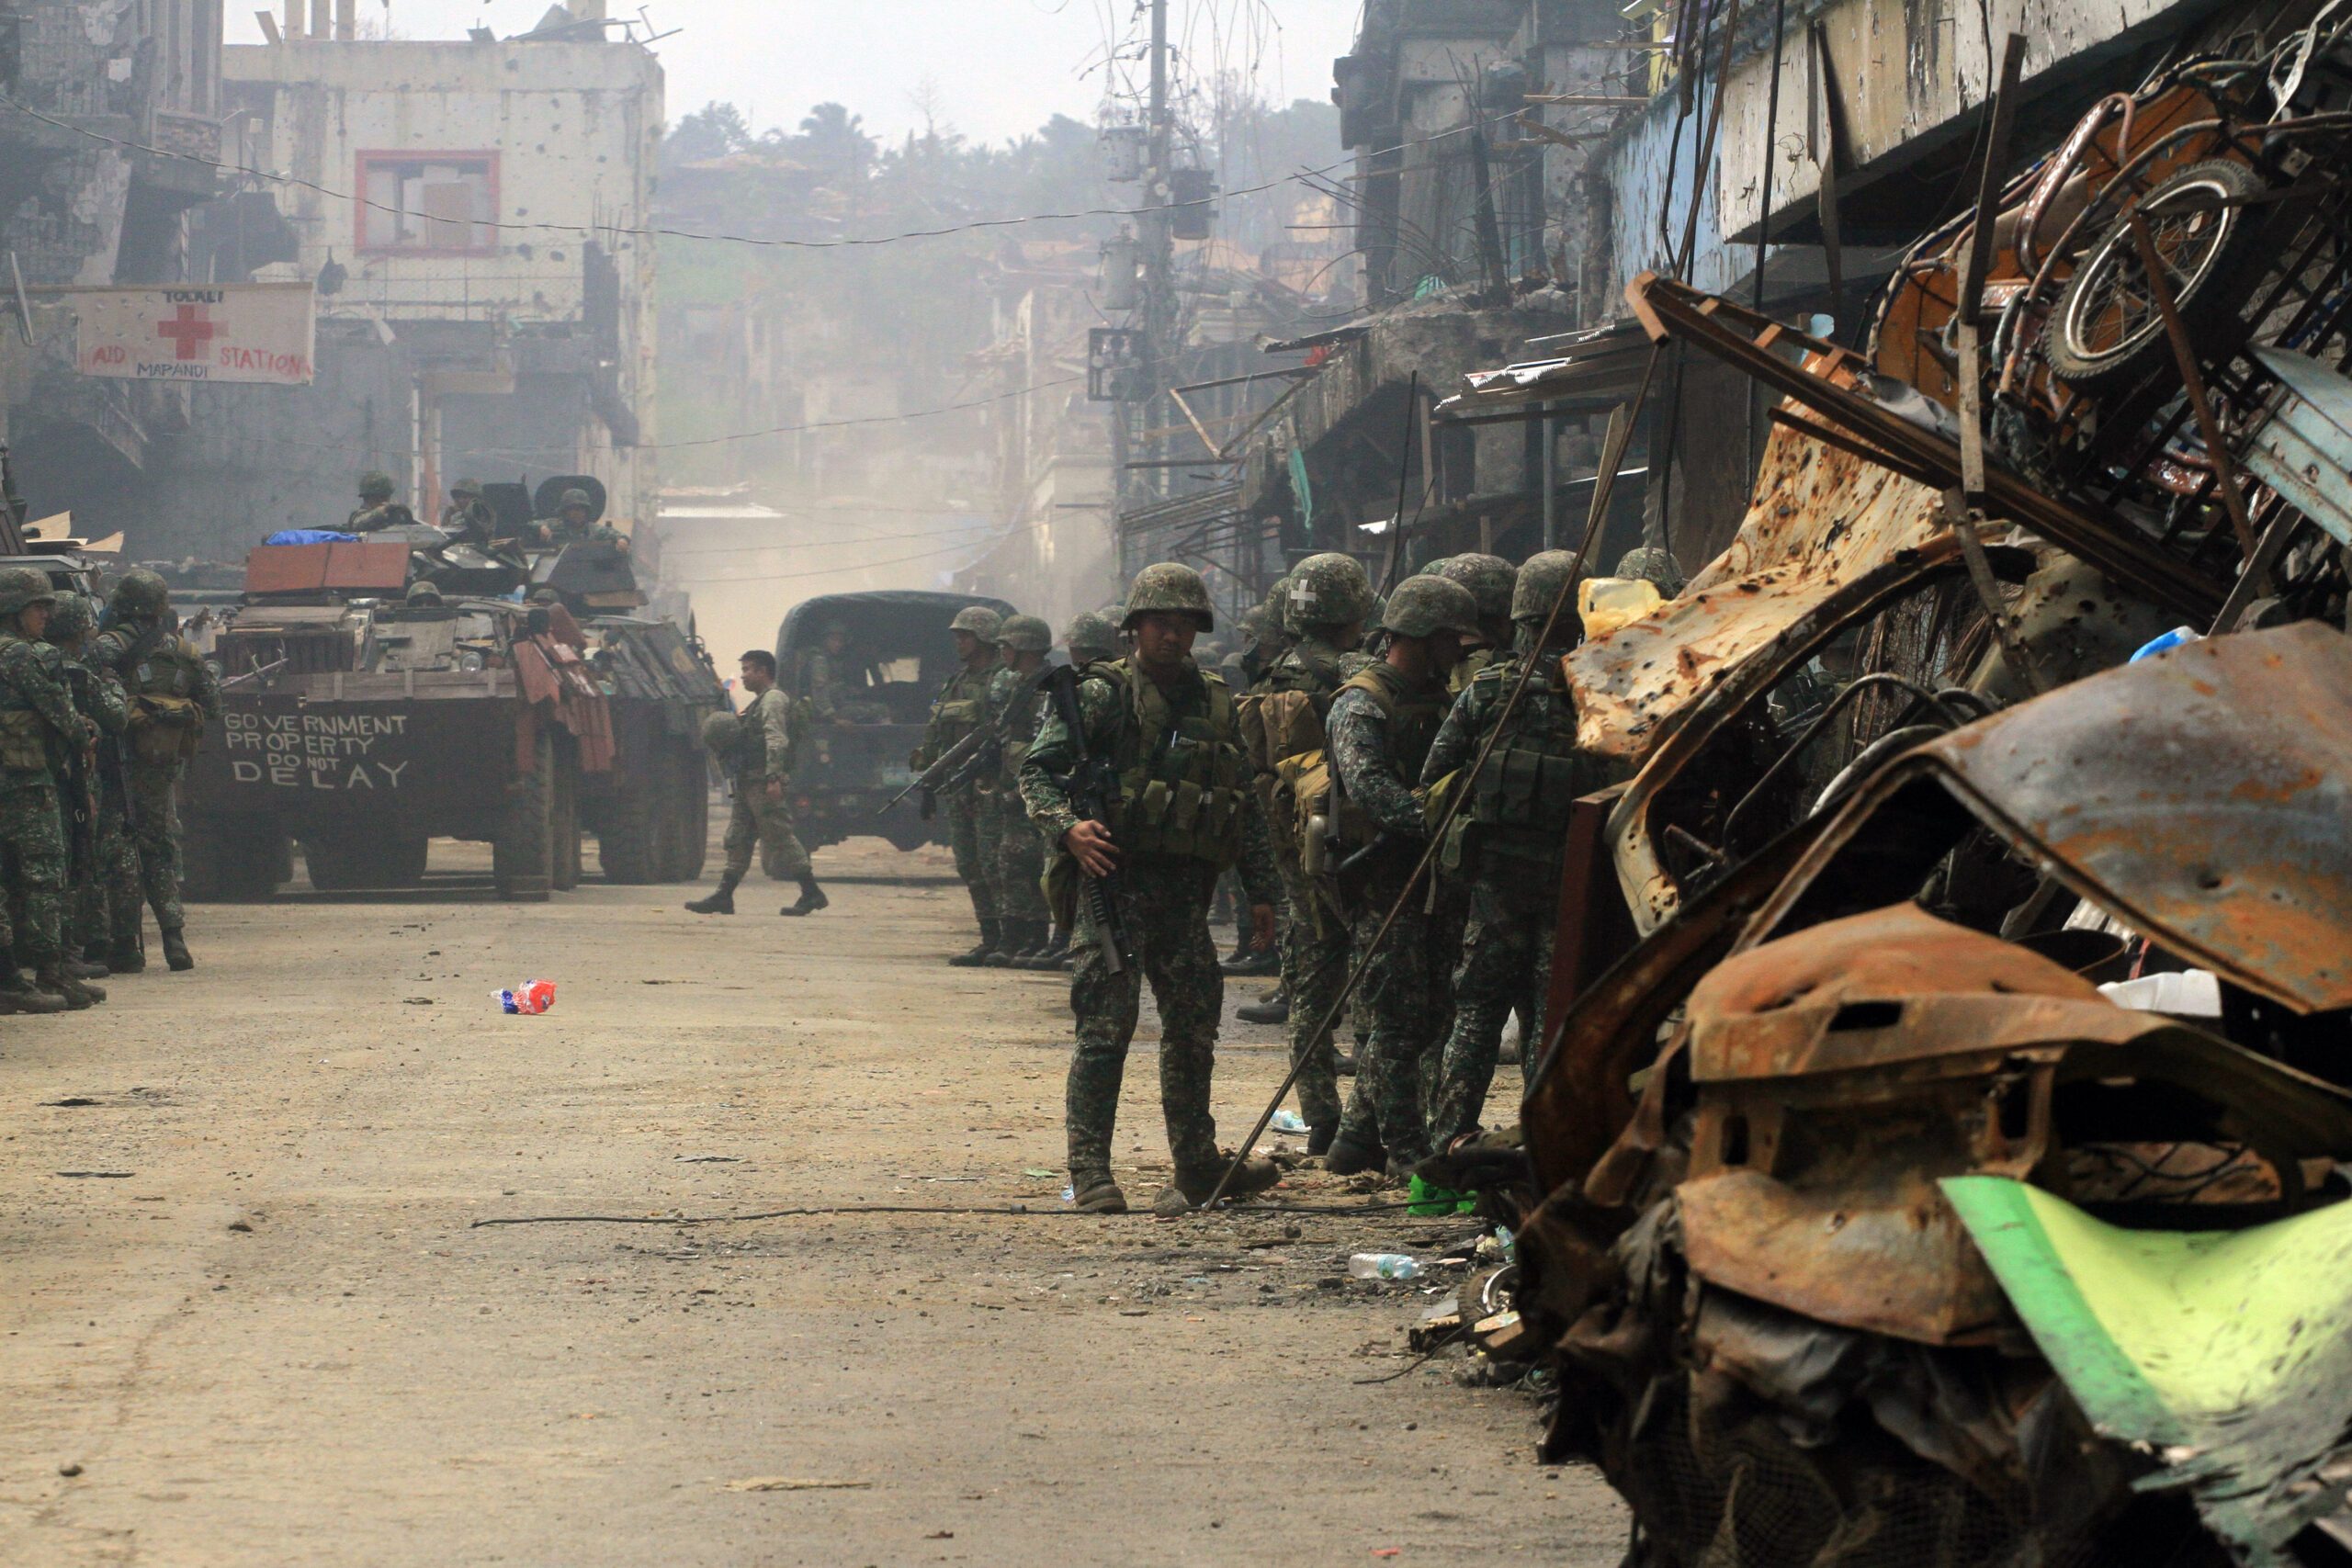 59 men suspected to be Maute rebels released